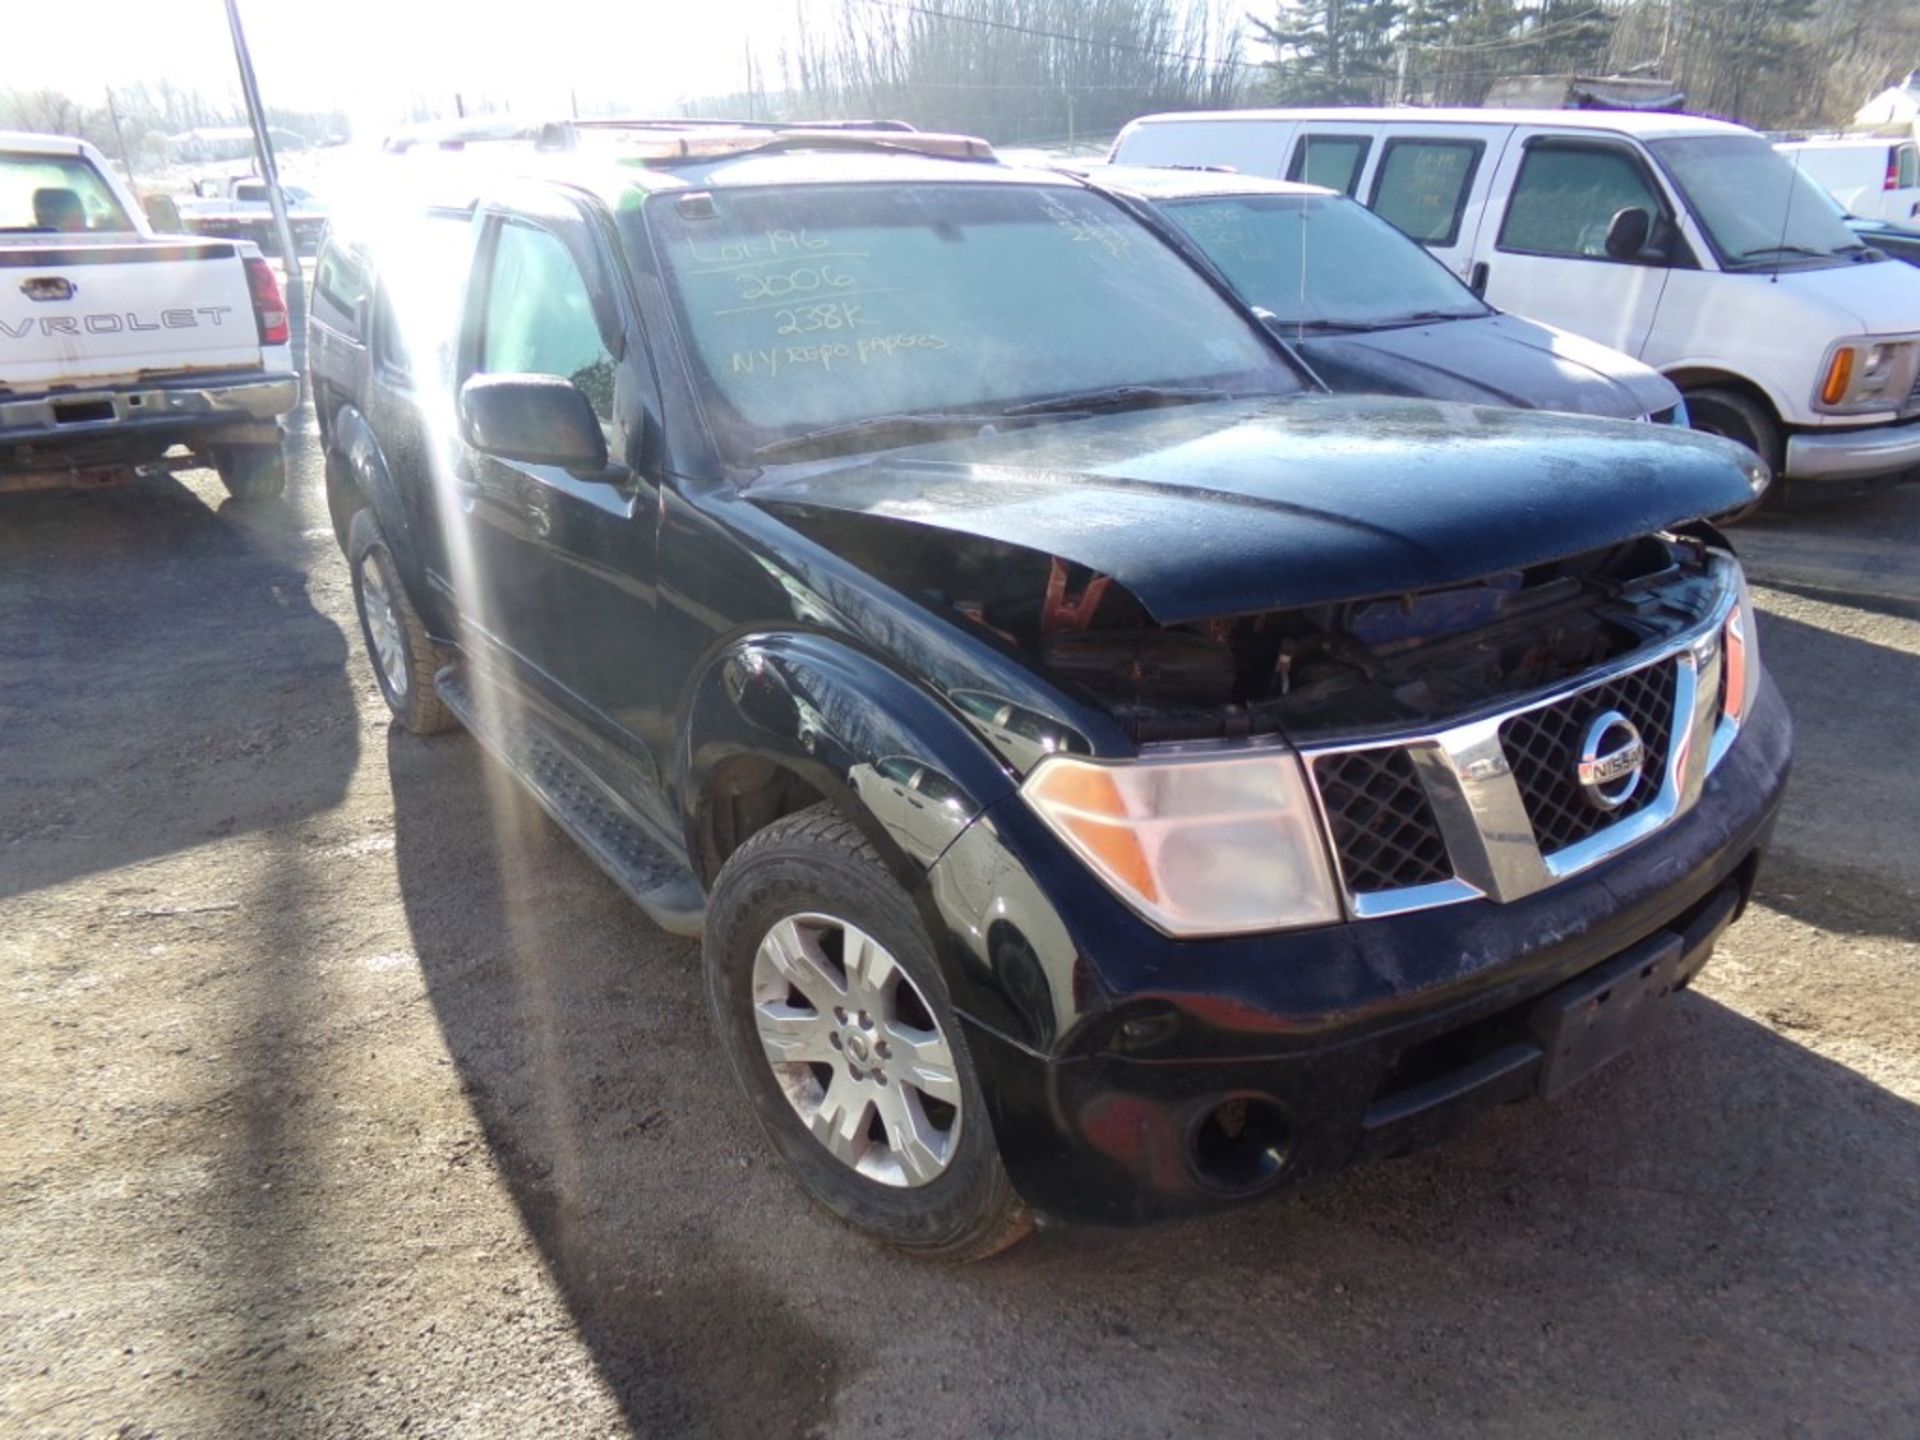 2006 Nissan Pathfinder LE, 4x4, Leather, Sunroof, 3rd Row Seating, Black, 238,502 Miles, VIN#: - Image 6 of 6